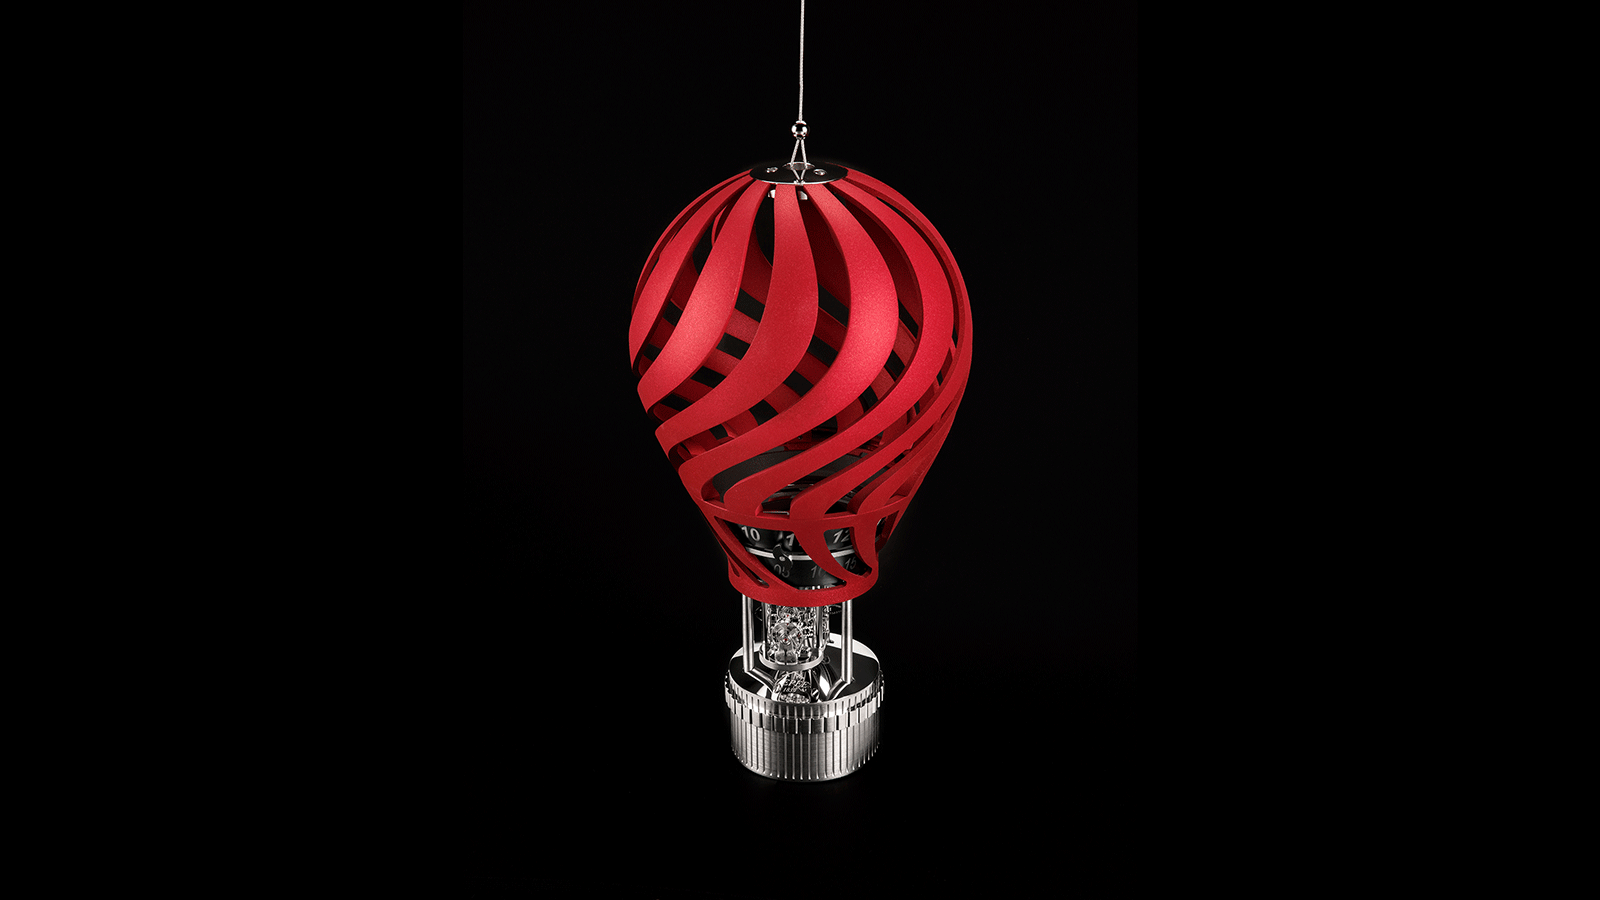 Designed by Margo Clavier, Hot Balloon embodies the dream of travel and adventure. As her first project, the collaboration with l’Épée 1839 offered a serious challenge: designing a mechanical clock.